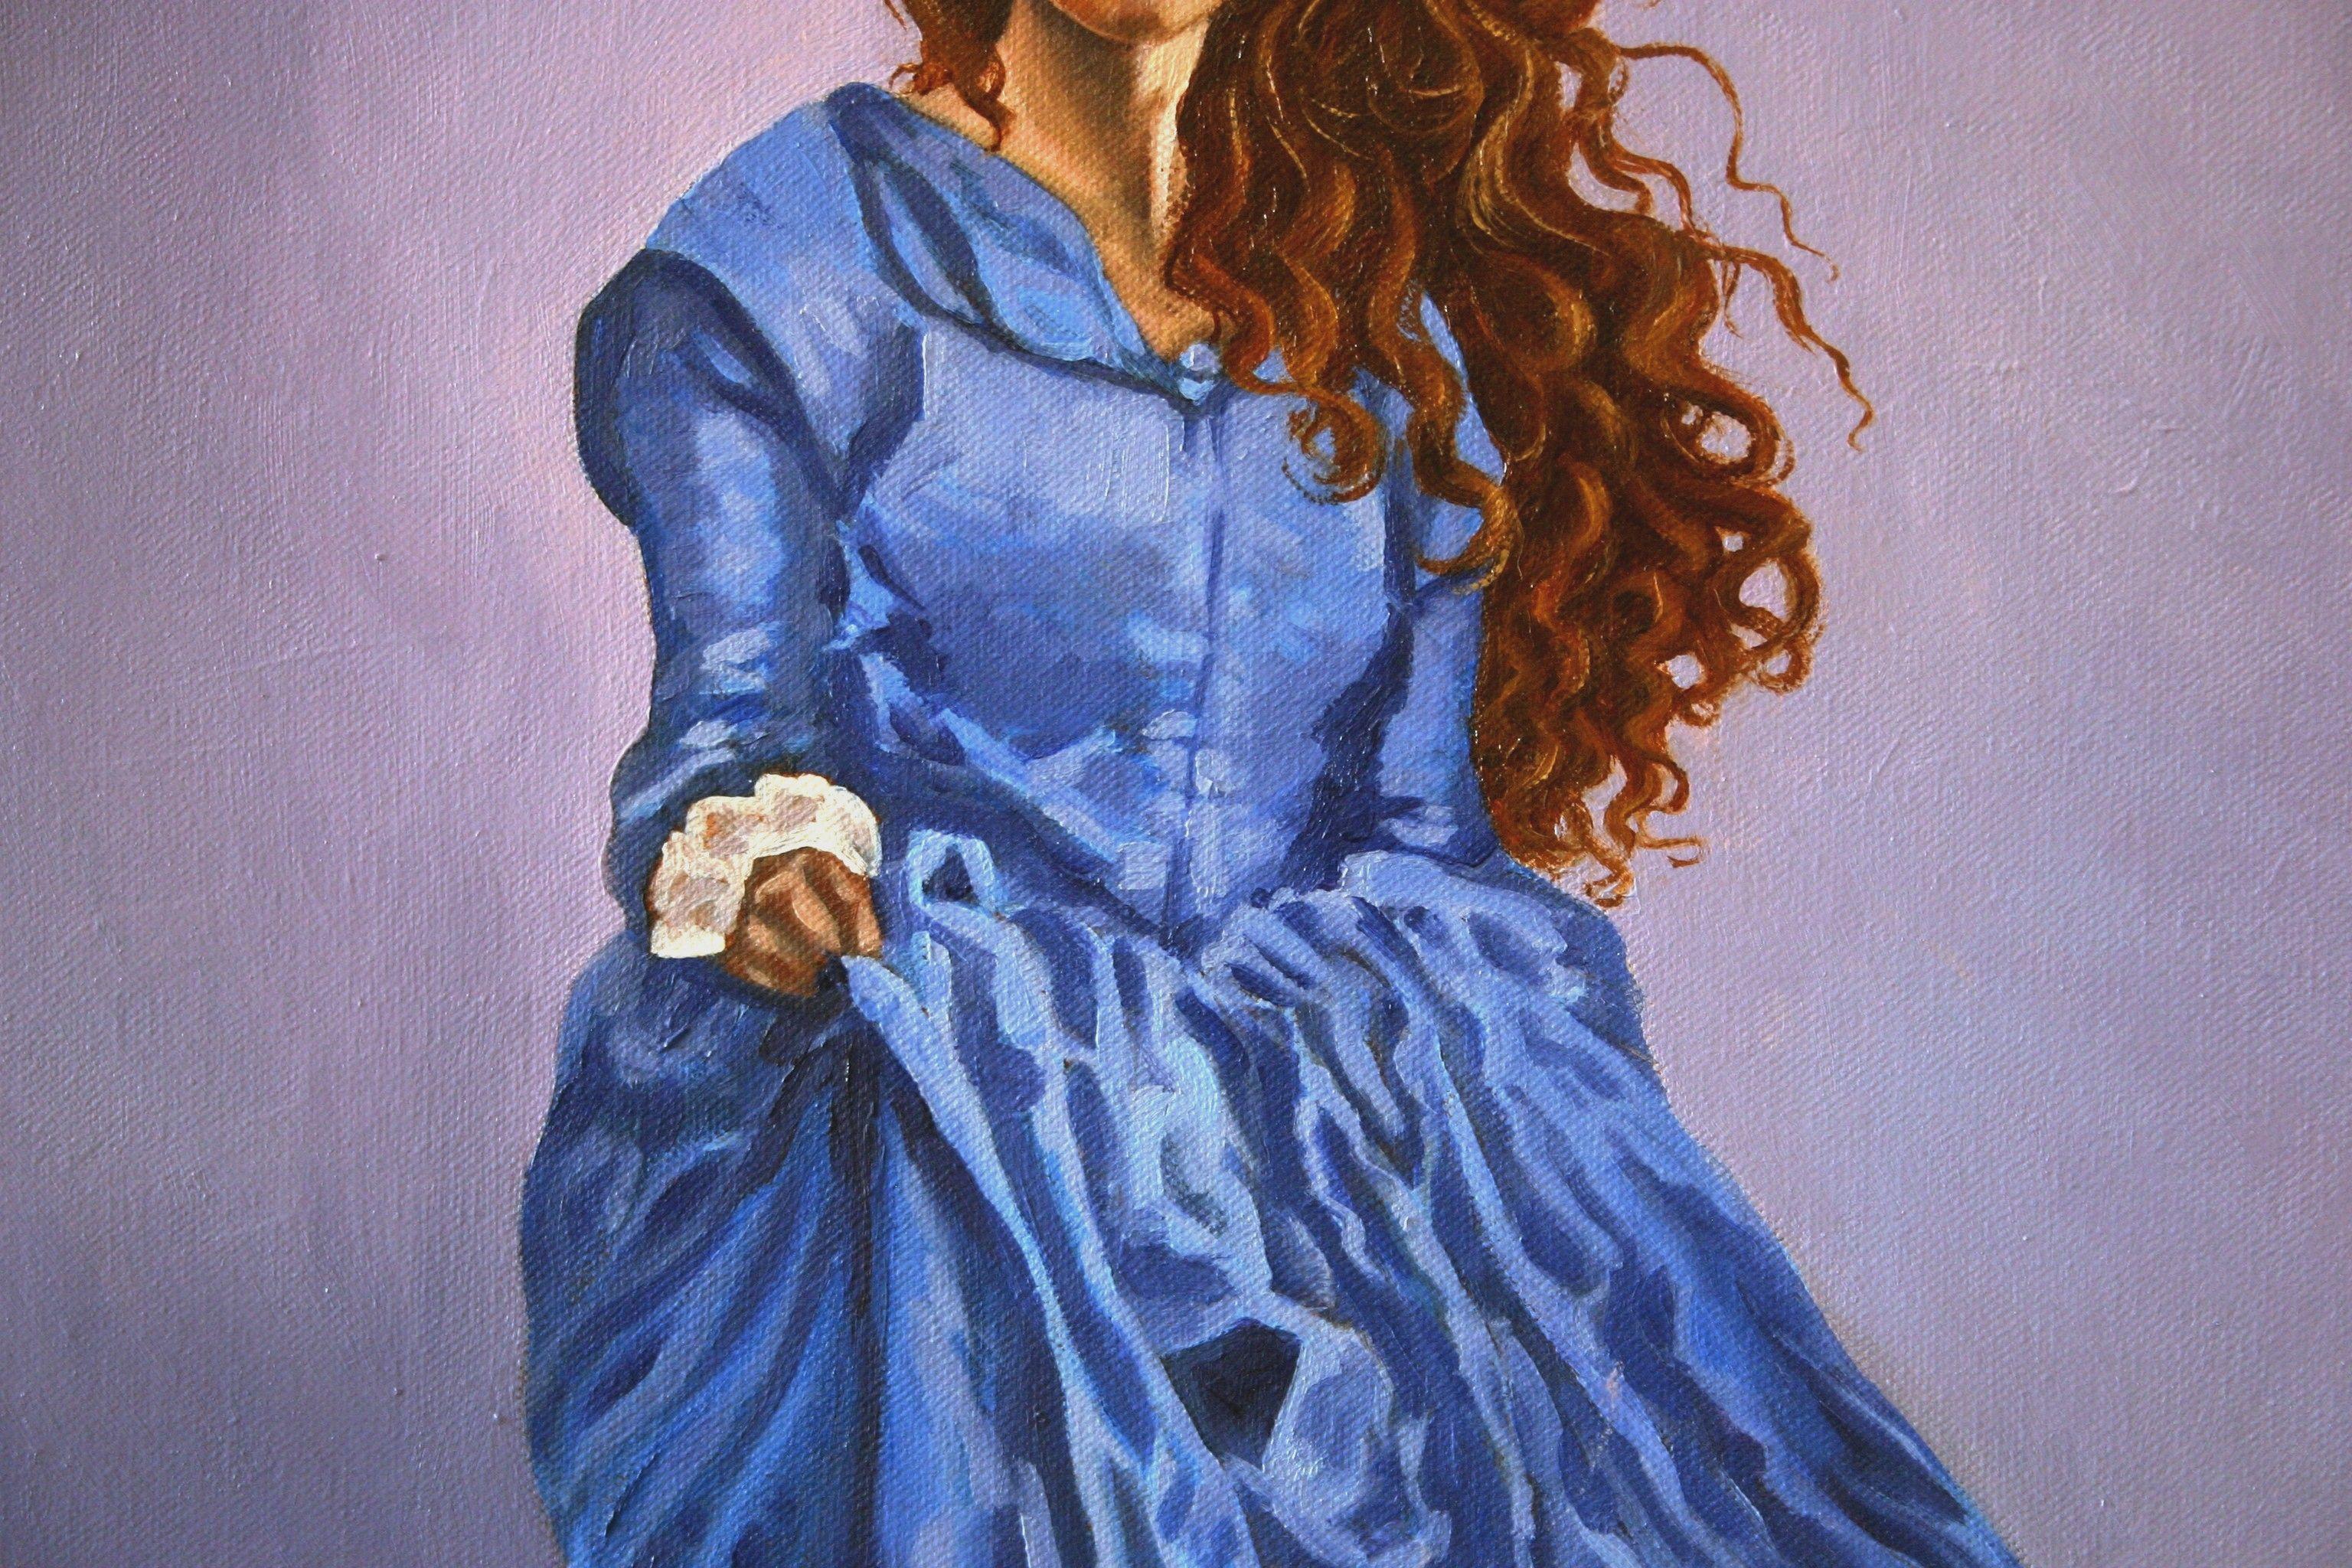 Contemporary Impressionism    This painting was inspired by Emily Bronte's classic novel Wuthering Heights.    â€œI wish I were a girl again, half-savage and hardy, and free.â€  ? Emily BrontÃ«, Wuthering Heights    The artist spent most of her own